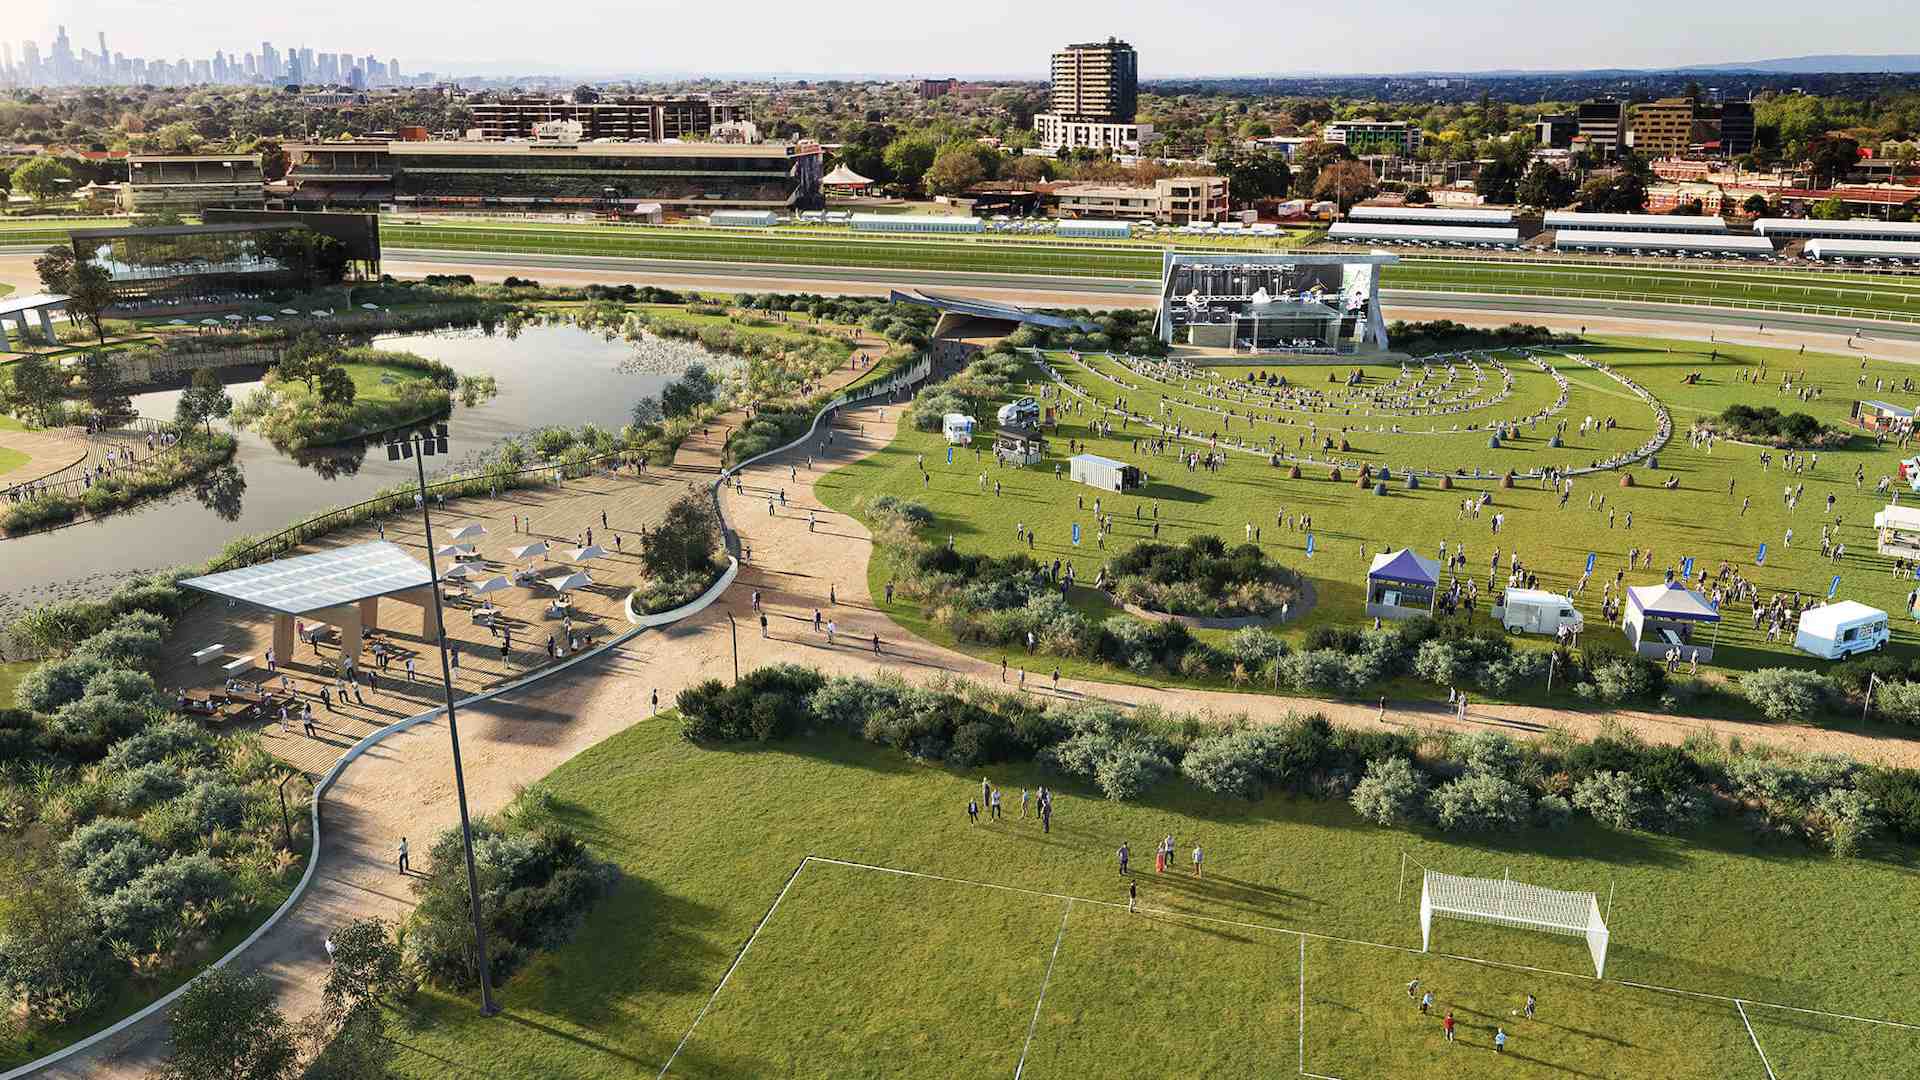 Caulfield Racecourse Reserve Looks Set to Be Revitalised as a Public Park and Recreation Space